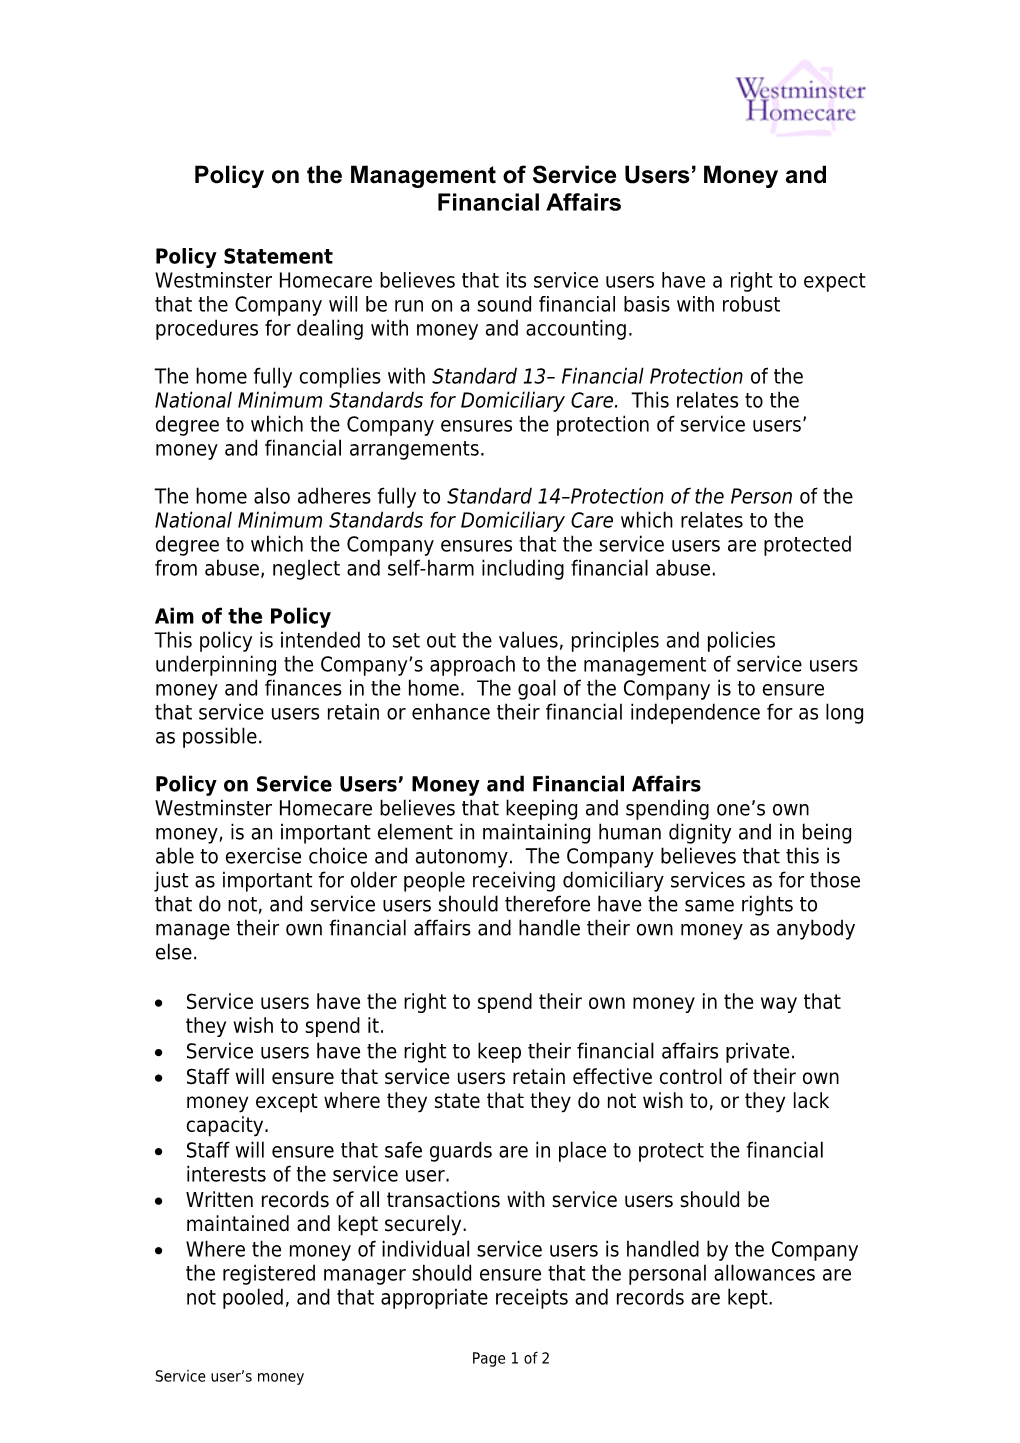 Policy on the Management of Service Users Money and Financial Affairs